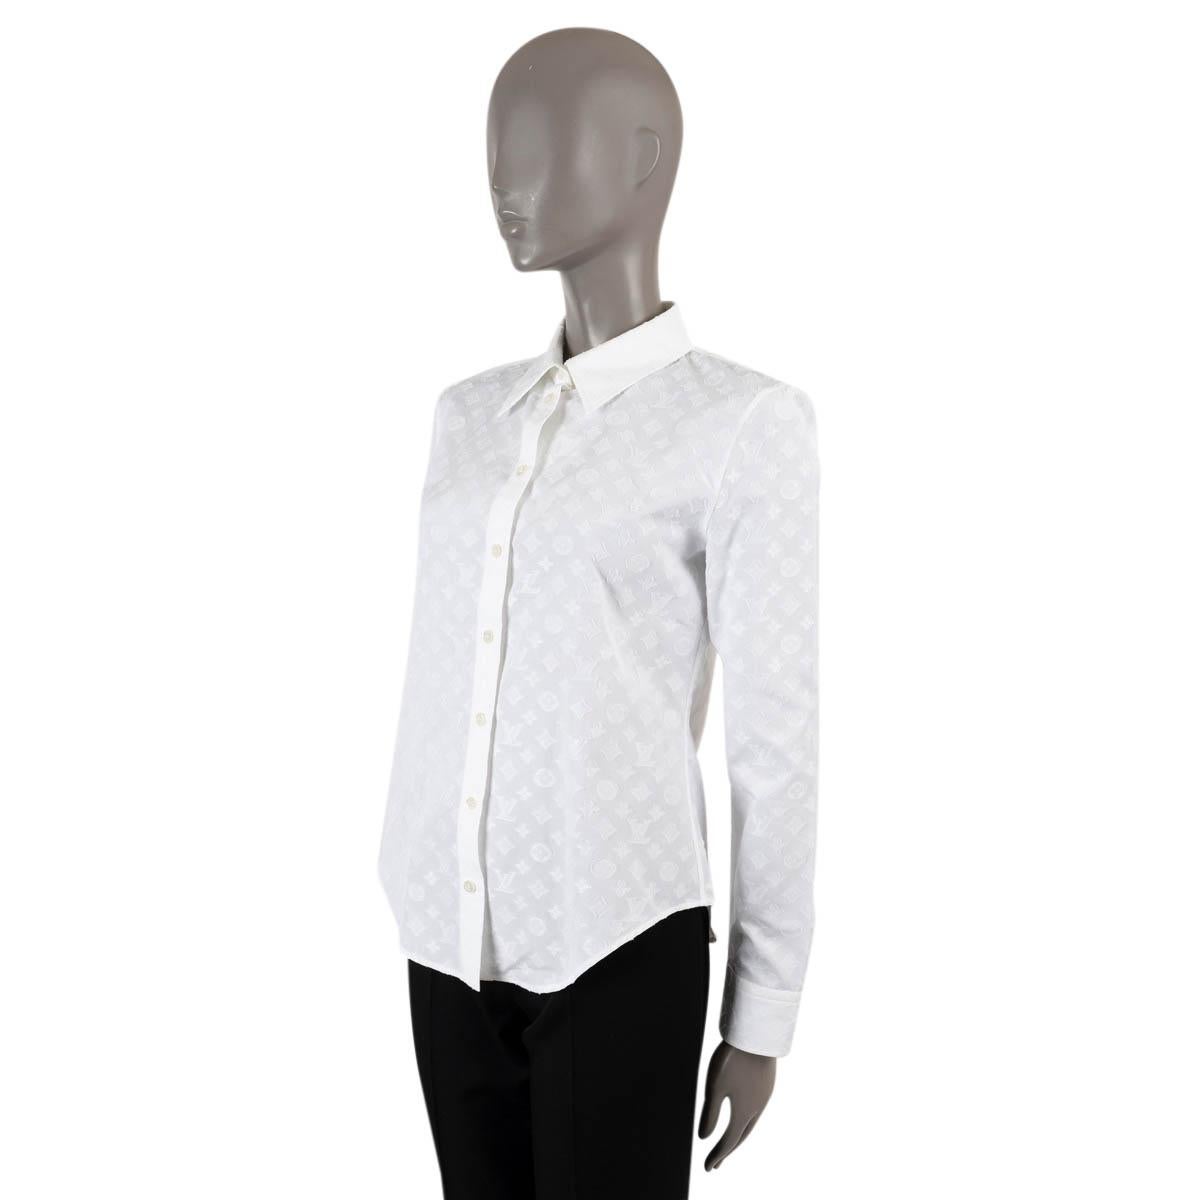 100% authentic Louis Vuitton classic monogam button-up shirt in white cotton (100%). Features buttoned cuffs. Brand New with tag.

2019 Pre-Fall

Measurements
Model	RW192W AQV FHBL14
Tag Size	38
Size	S
Shoulder Width	40cm (15.6in)
Bust From	92cm